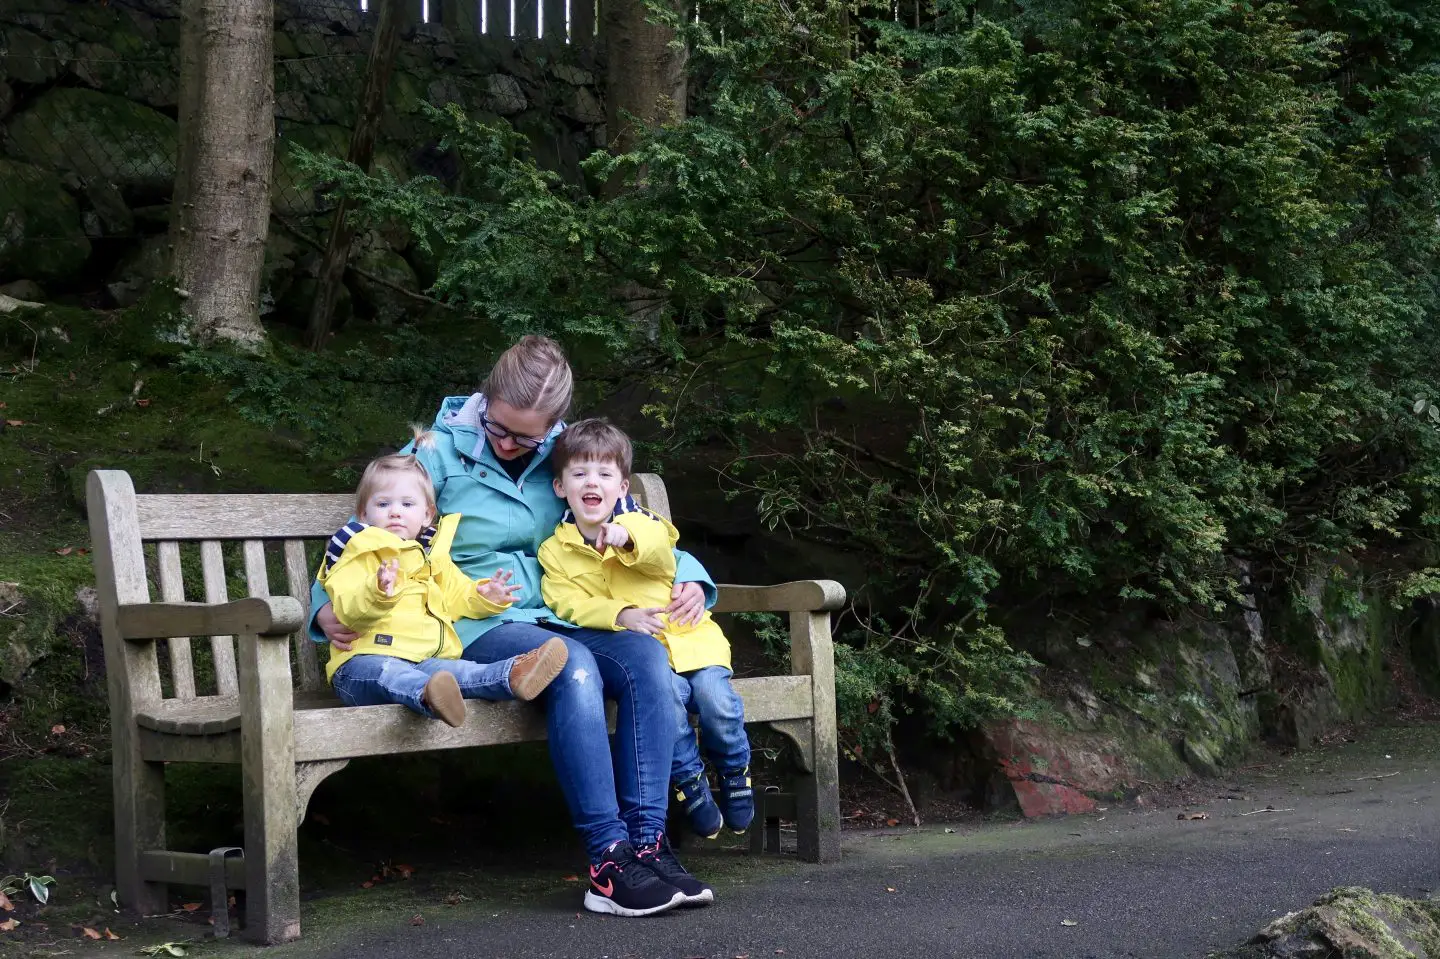 A mother and two children are on a bench in a park. The woman is wearing a teal coloured raincoat and her sons are in yellow jackets.